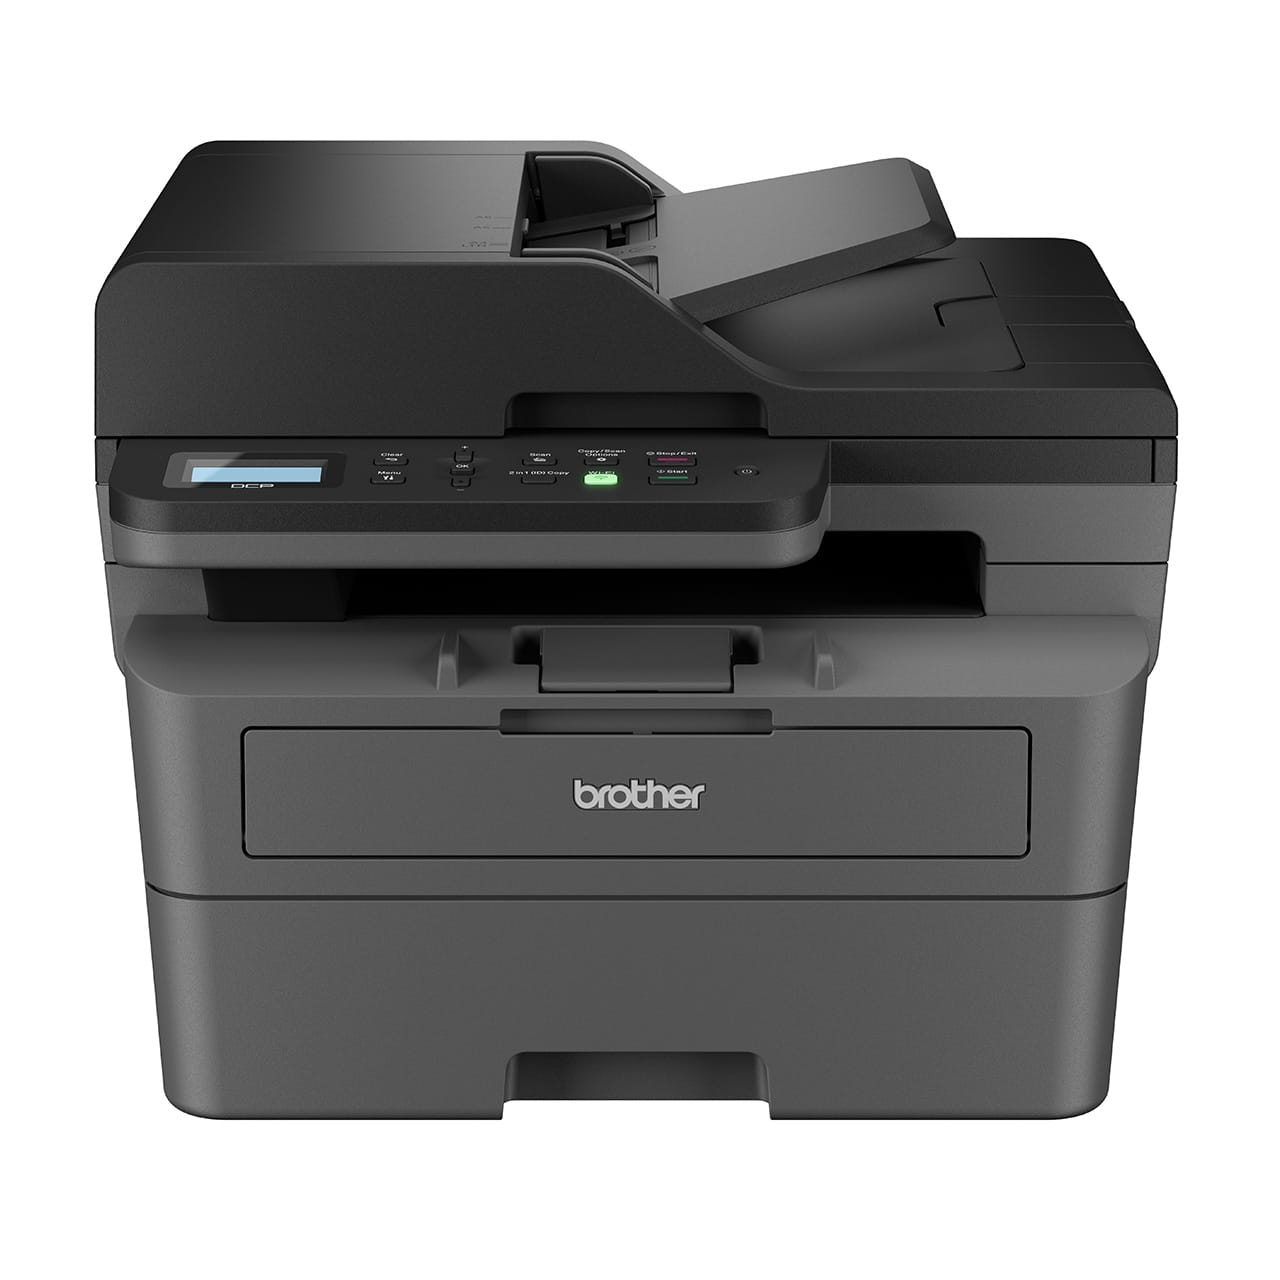 Brother DCP-L2640DW Mono Laser Printer Front View